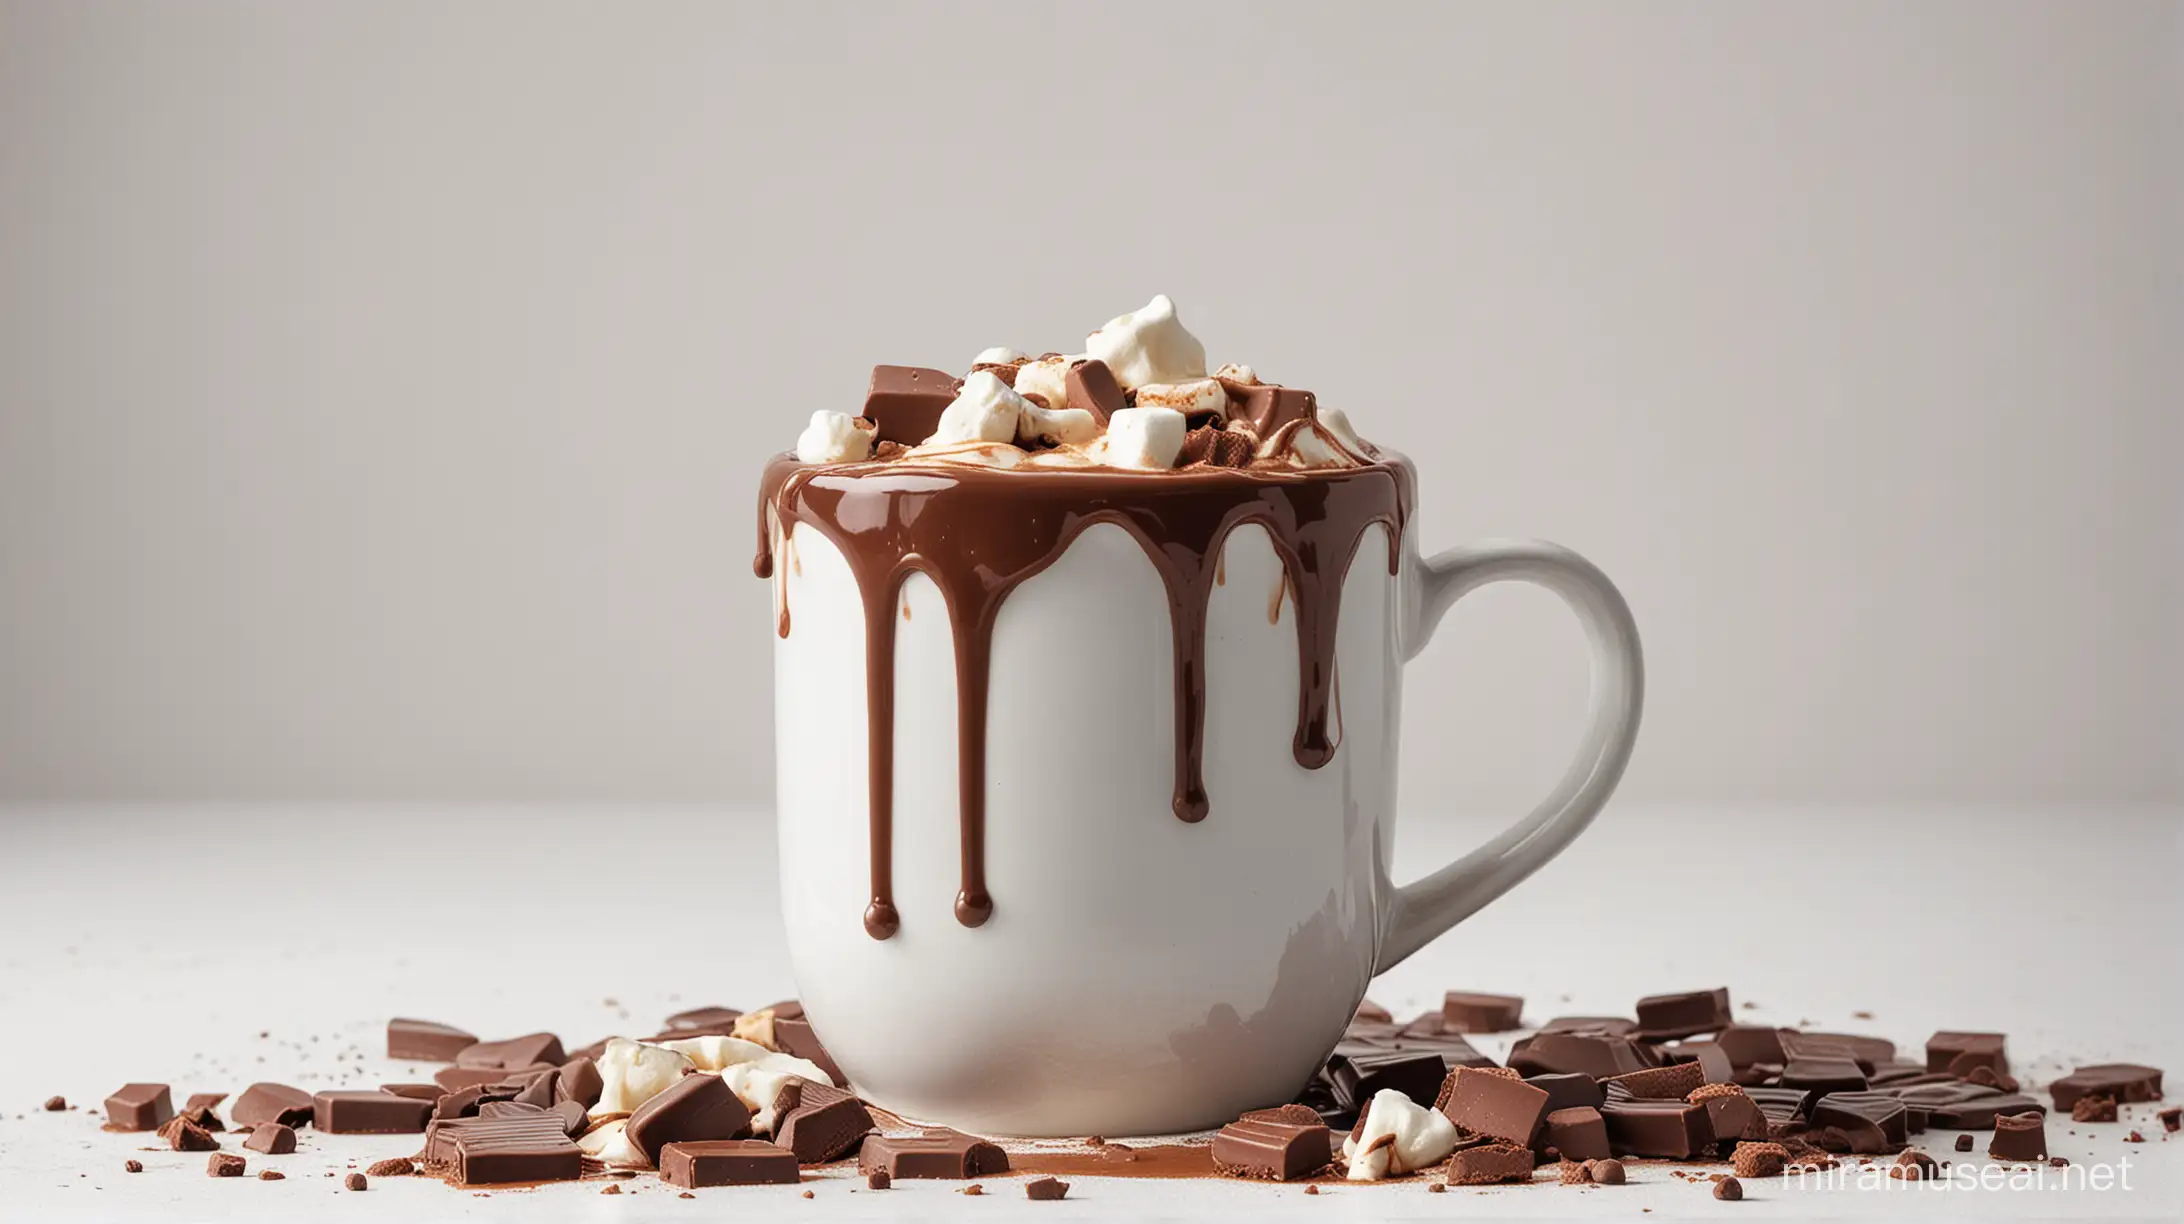 hot chocolate dripping against a white background